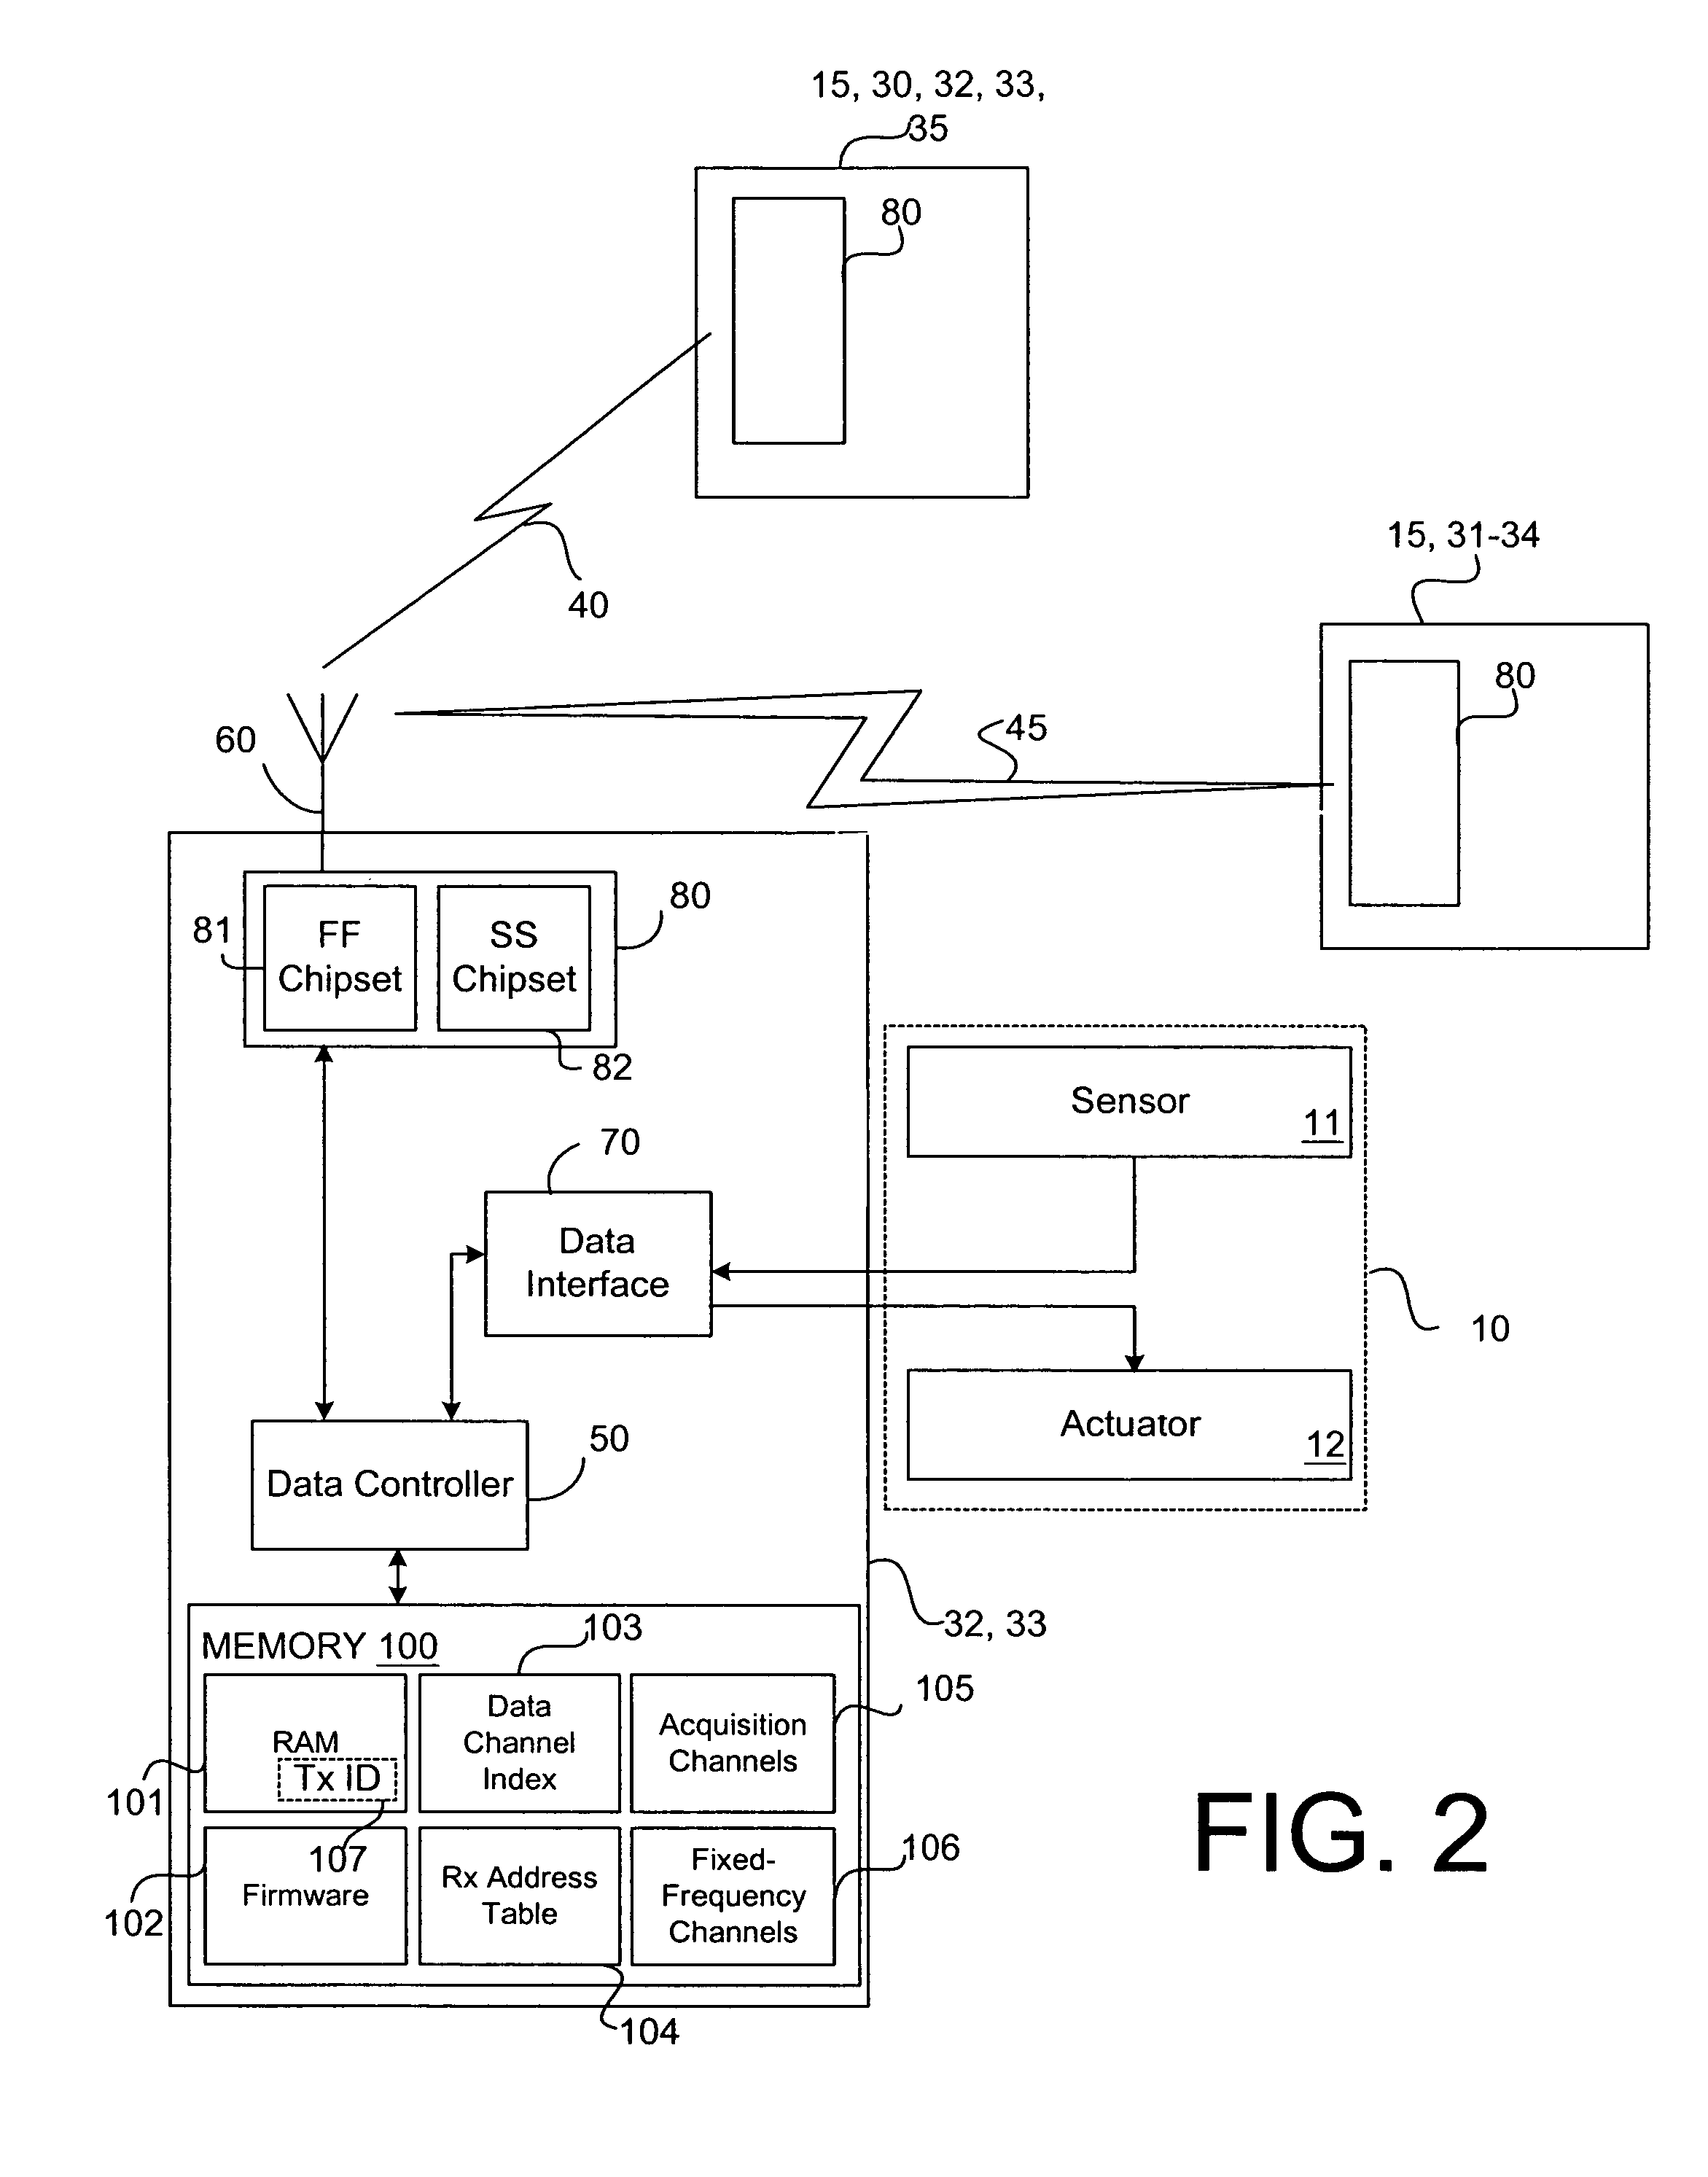 System and method for monitoring remote devices with a dual-mode wireless communication protocol